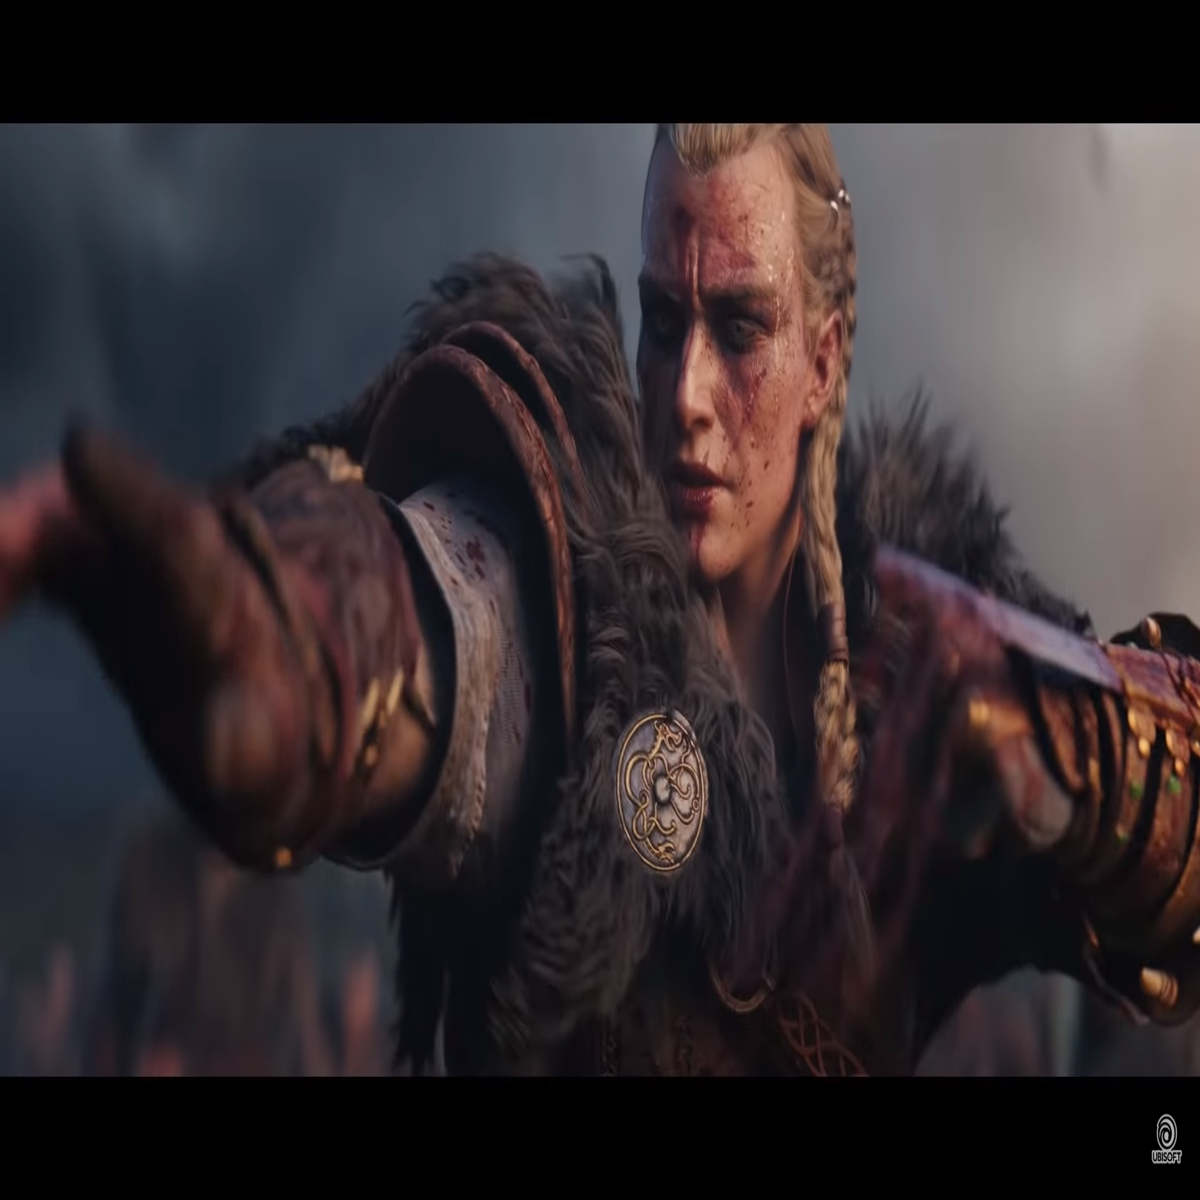 Assassin's Creed Valhalla is Assassin's Creed with vikings - The Verge